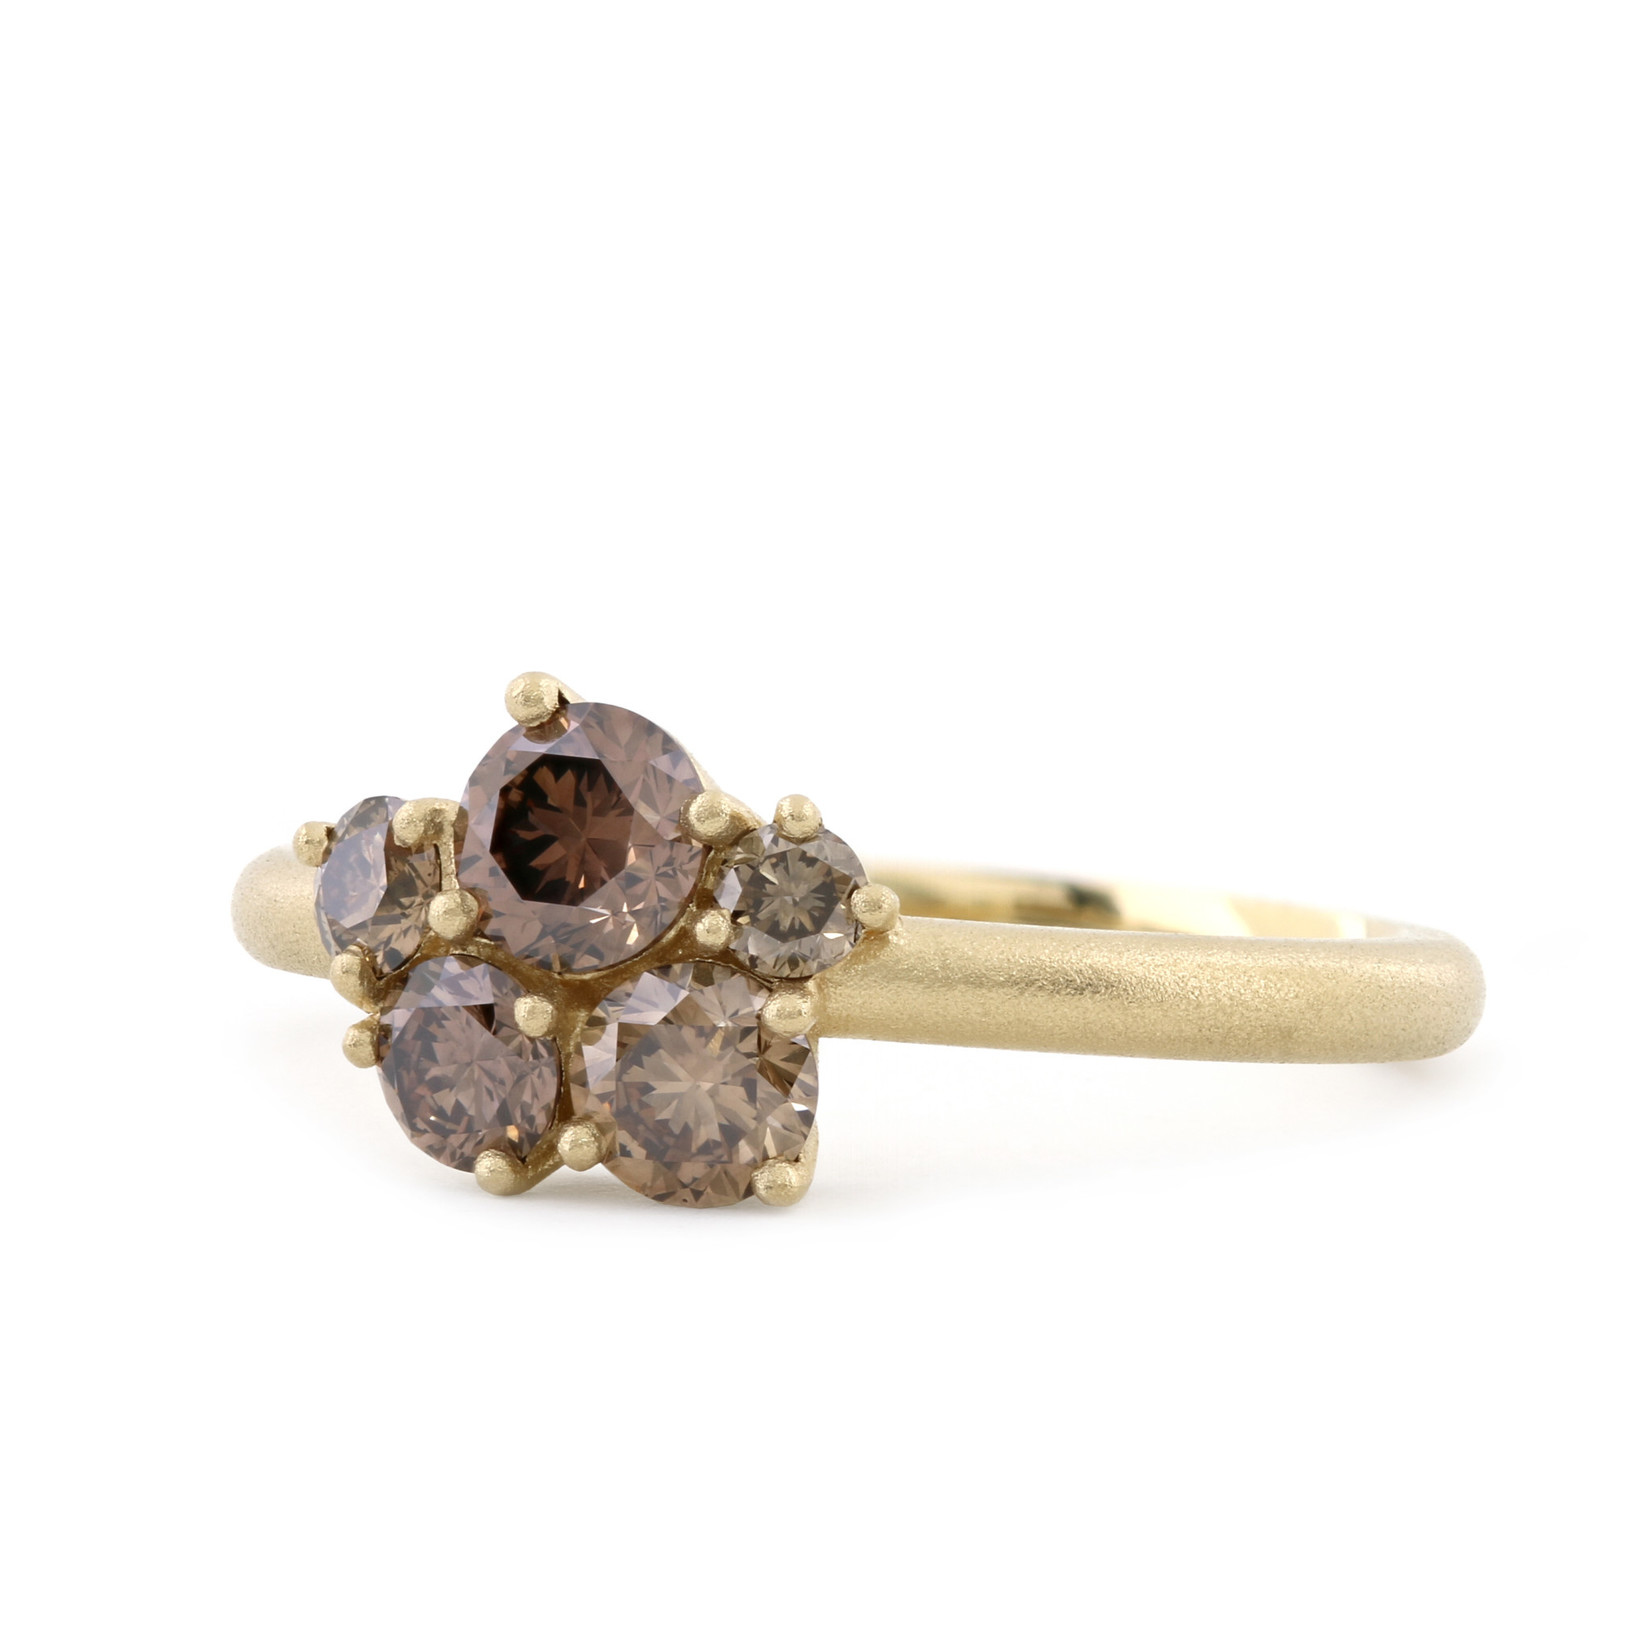 Baxter Moerman Lilah Ring with Cognac and Champagne Diamonds